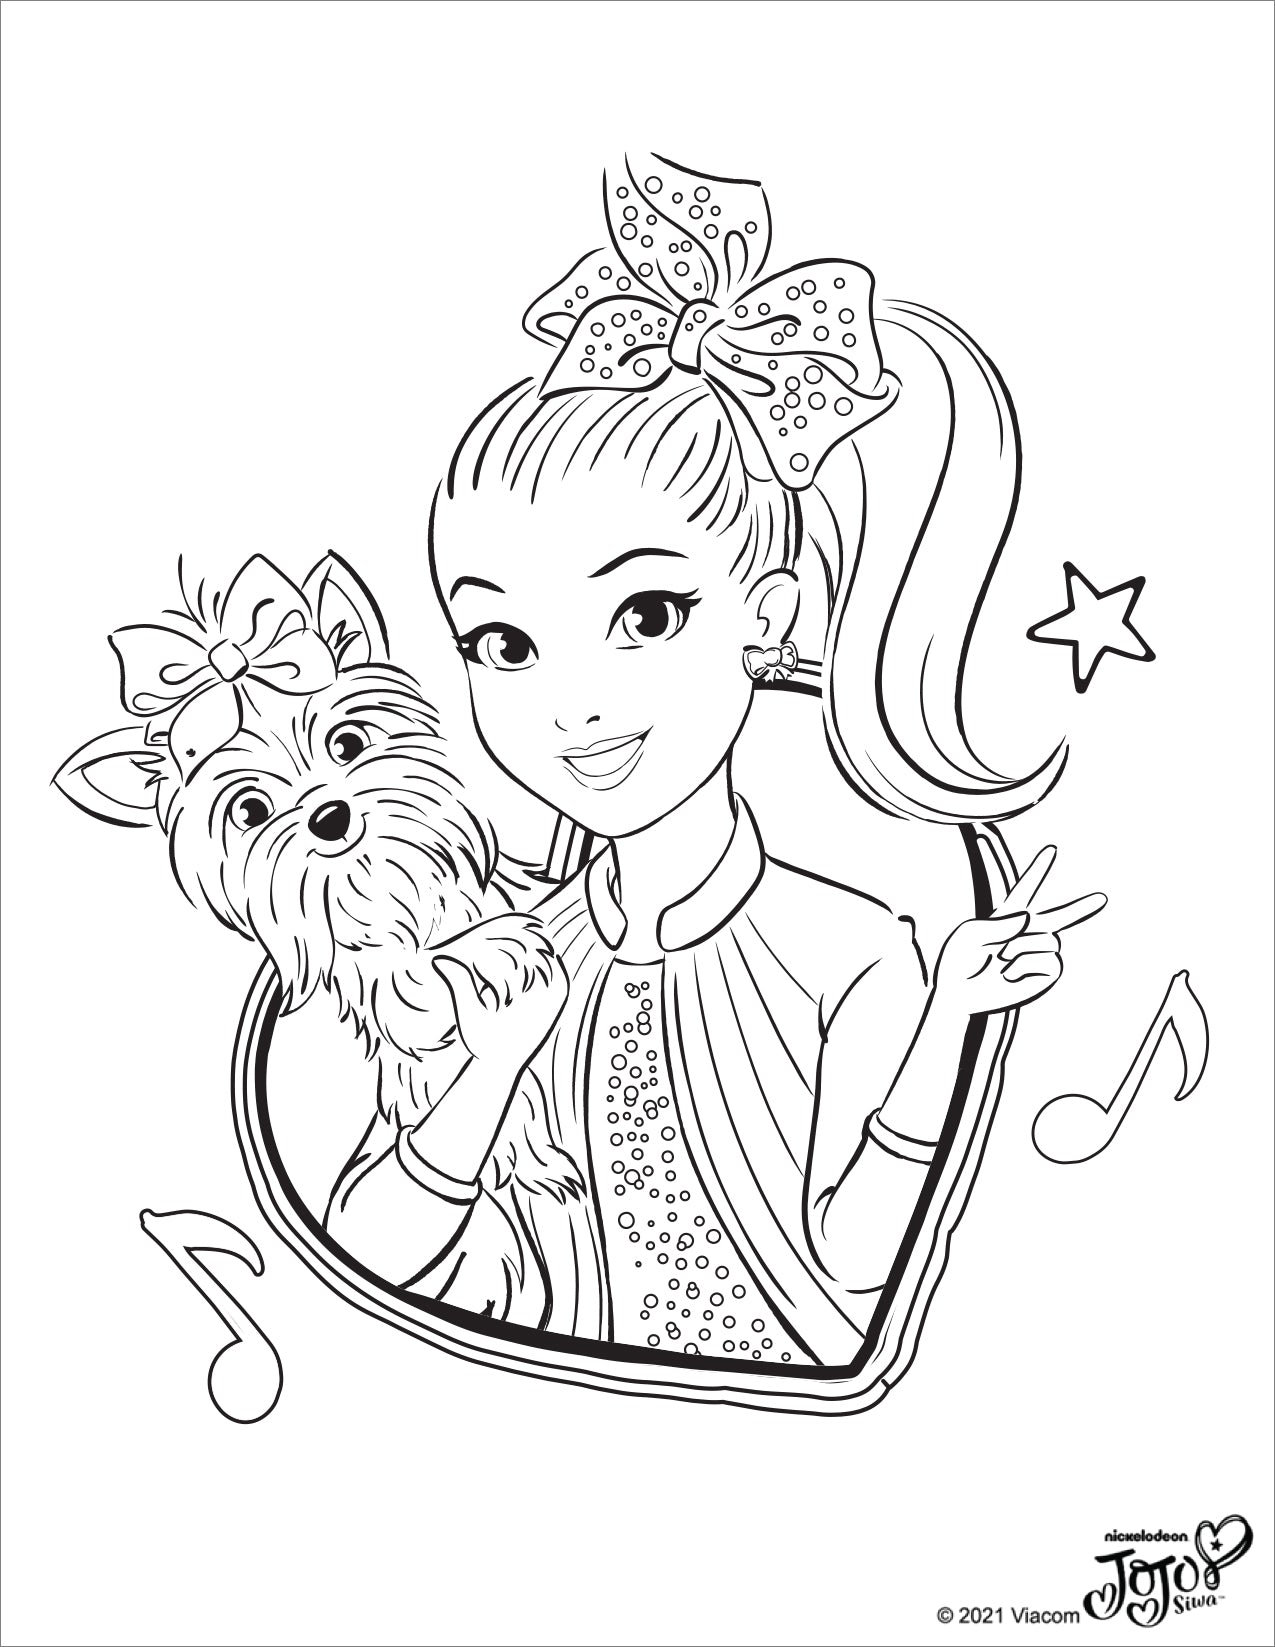 JoJo Siwa Coloring Pages | CultureFly